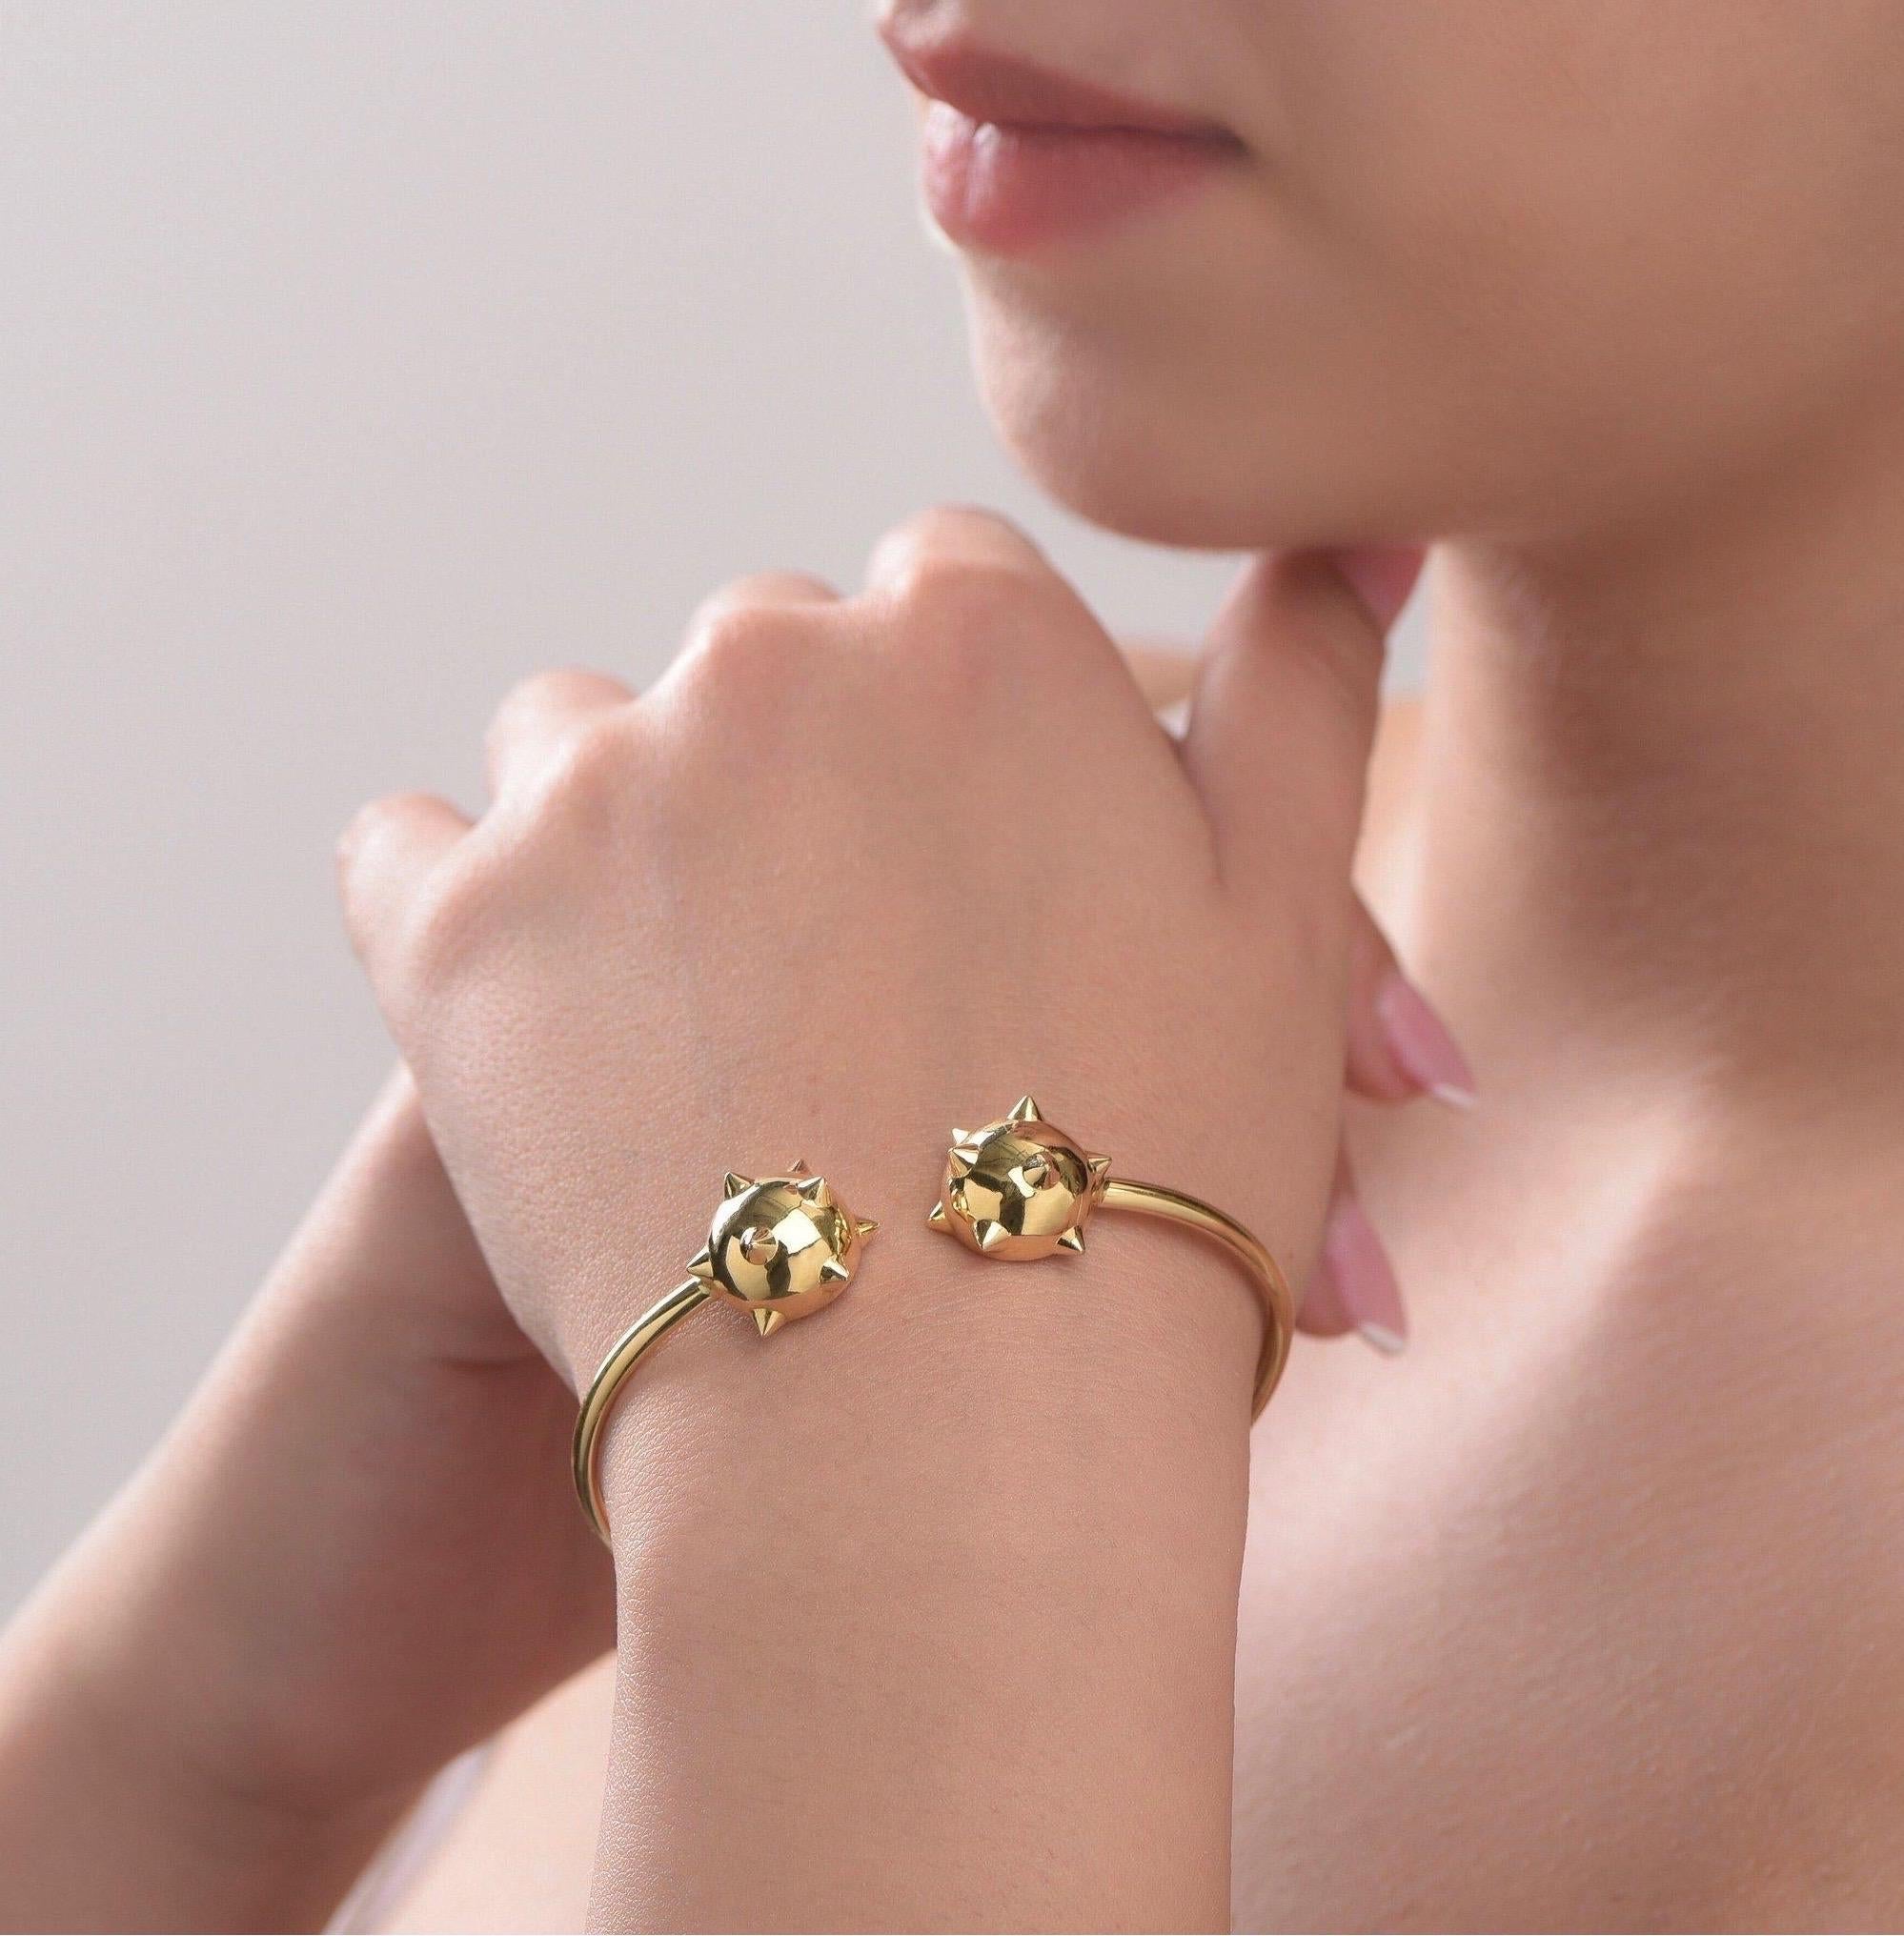 The ‘Morning Star’ flexible cuff is crafted in 18K yellow gold, hallmarked in Cyprus. This impressive cuff bracelet, comes in a highly polished finish and is composed of sculptural parts and flexible tube which makes it very comfortable and easy to